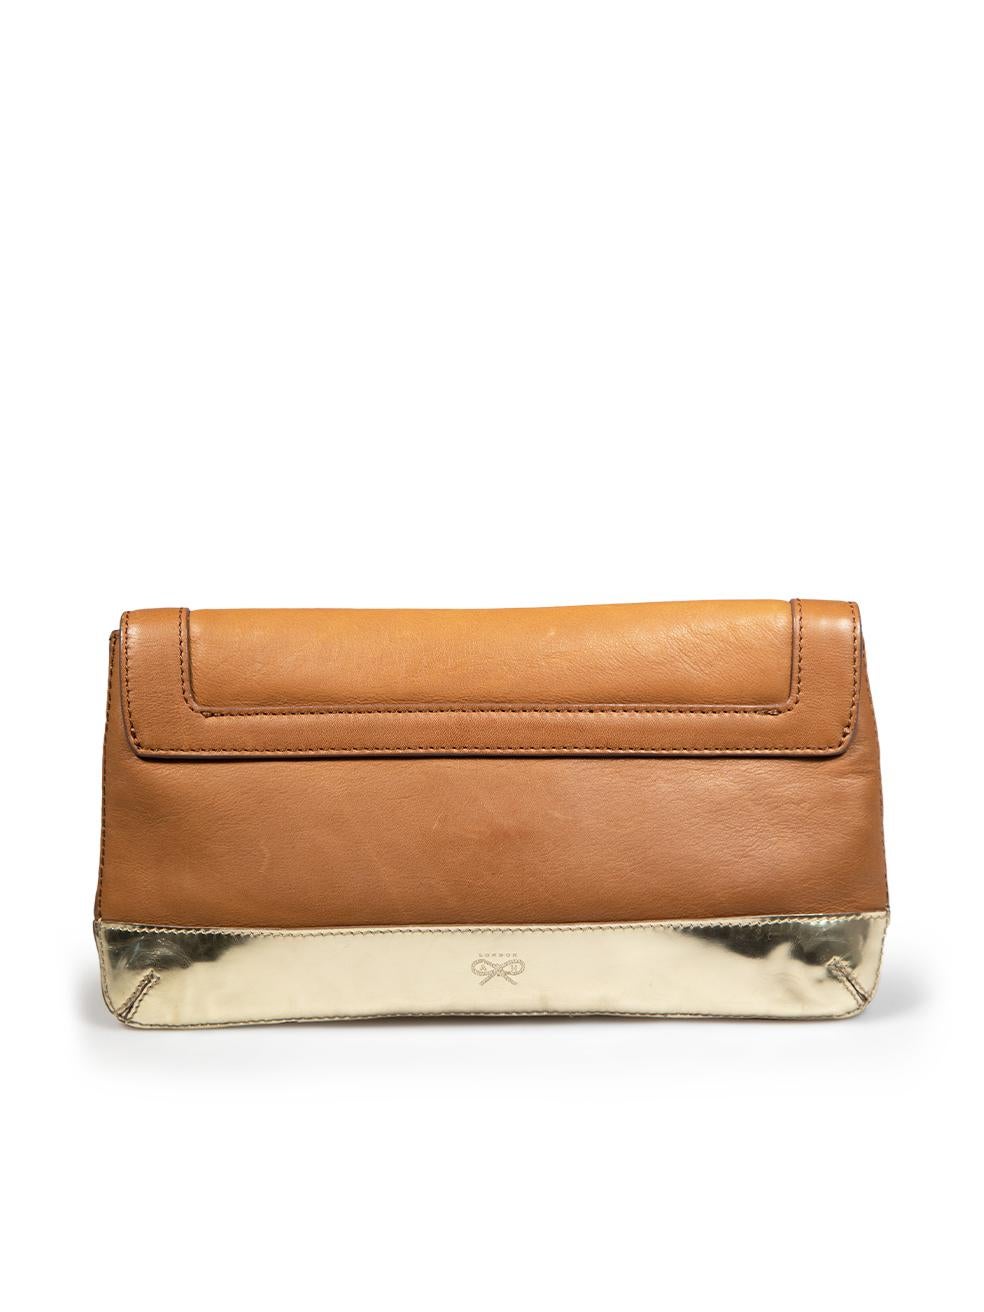 Anya Hindmarch Brown Leather Gold Hardware Clutch In Excellent Condition For Sale In London, GB